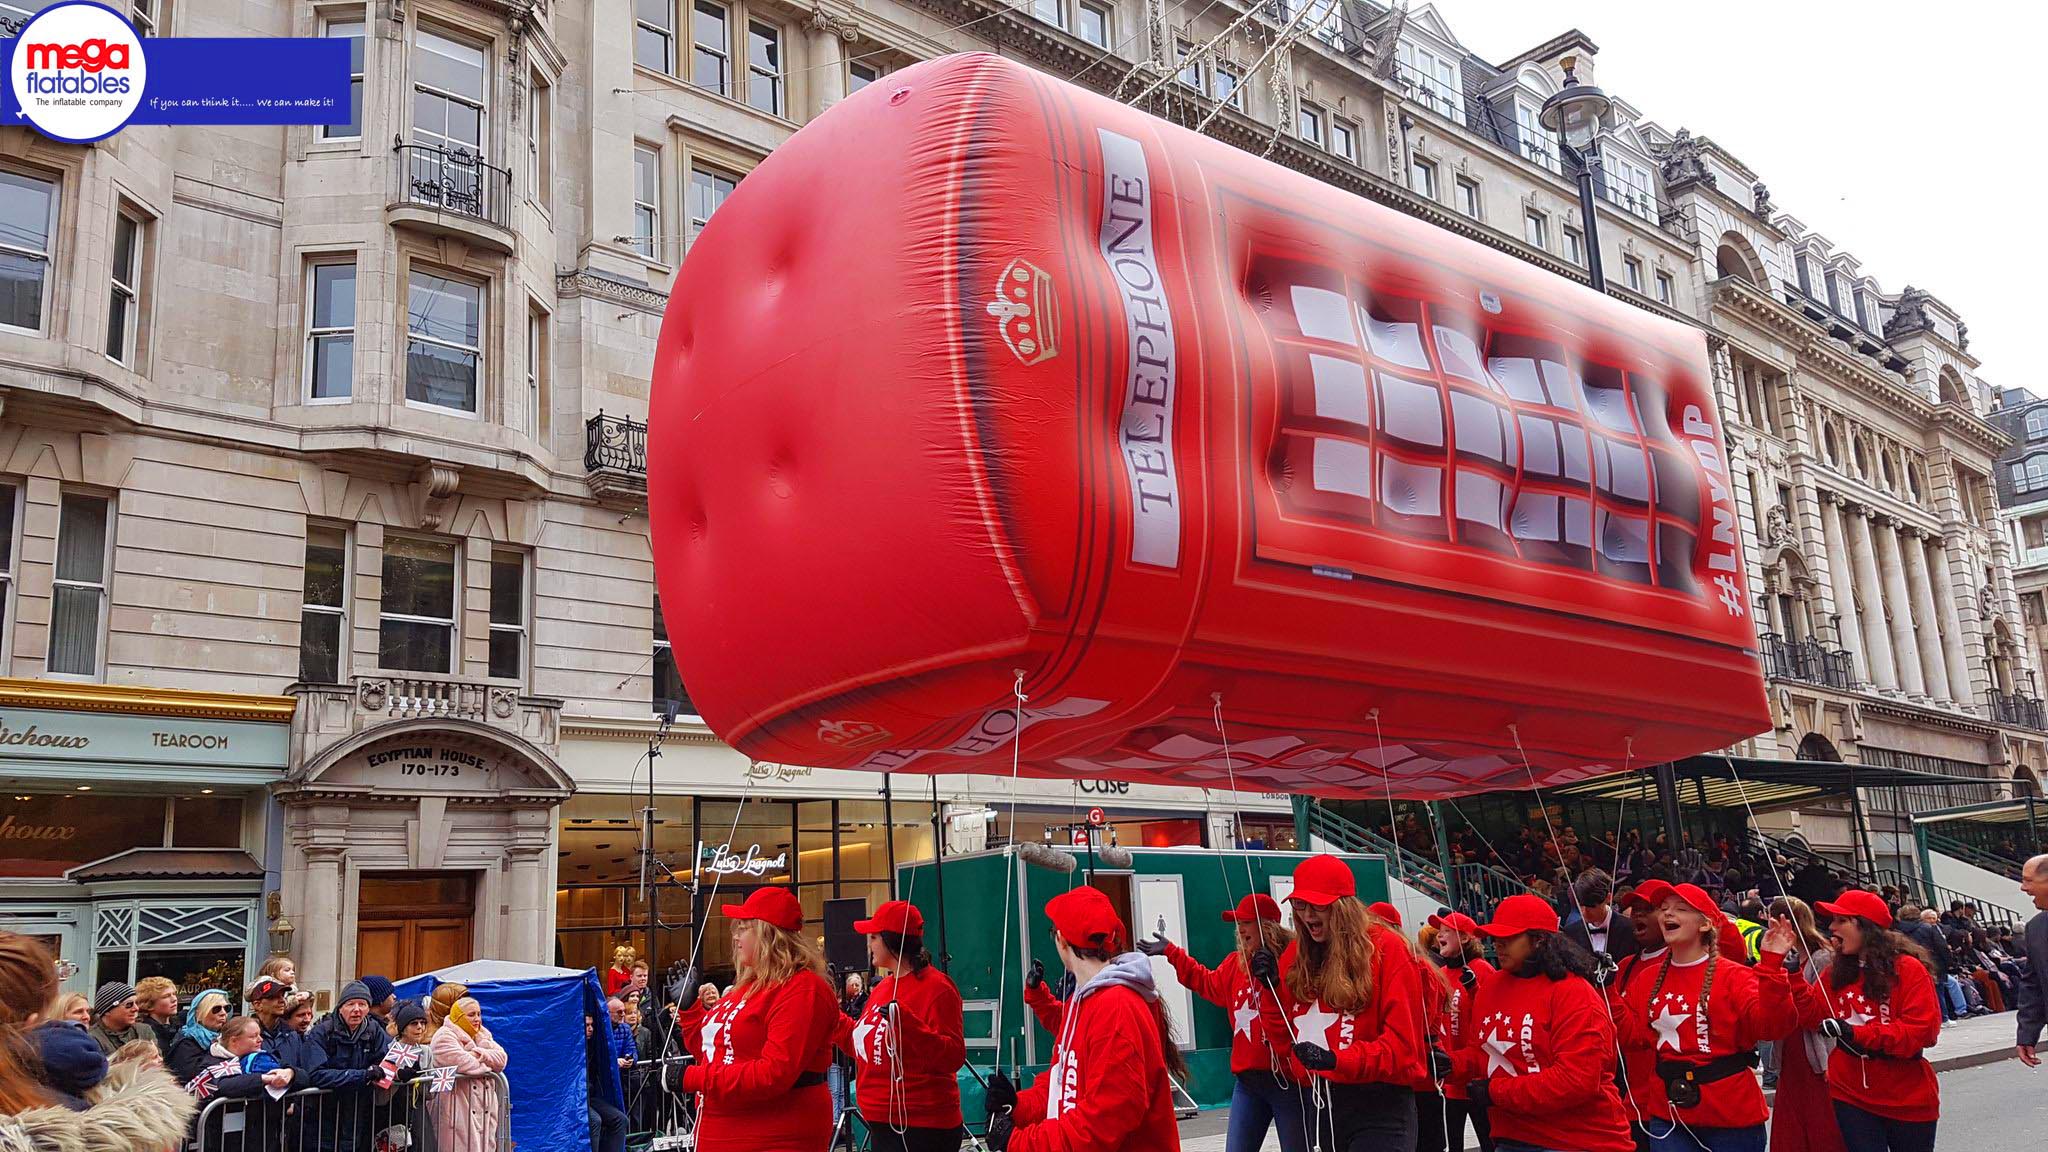 Inflatable Red London Telephone Box